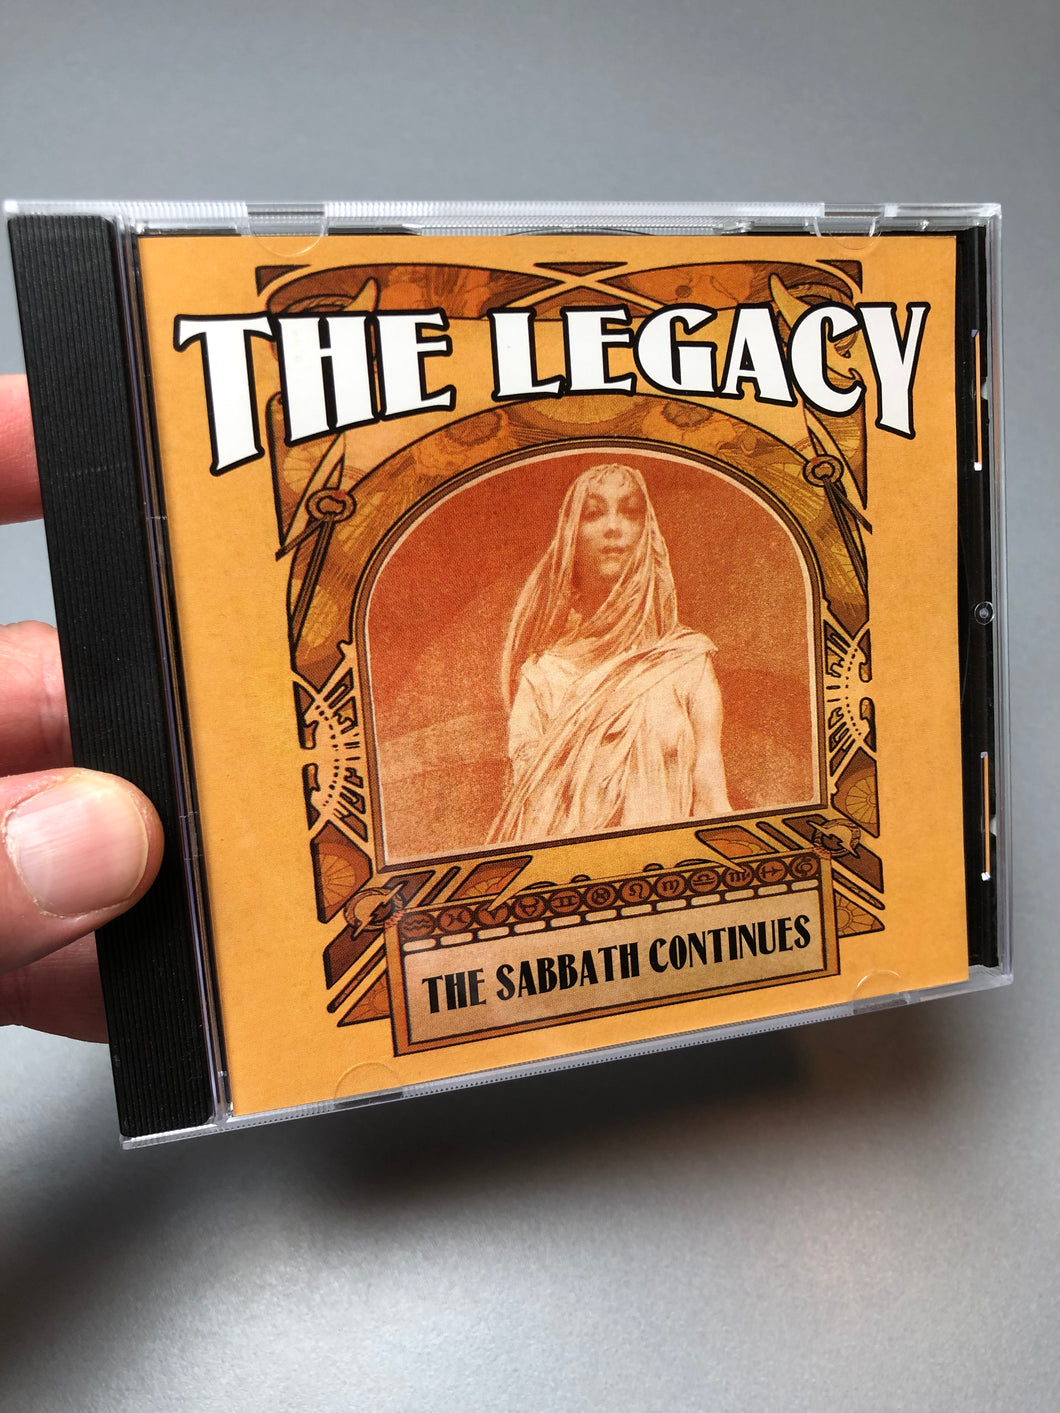 The Legacy - The Sabbath Continues, reissue, Sweden 1998